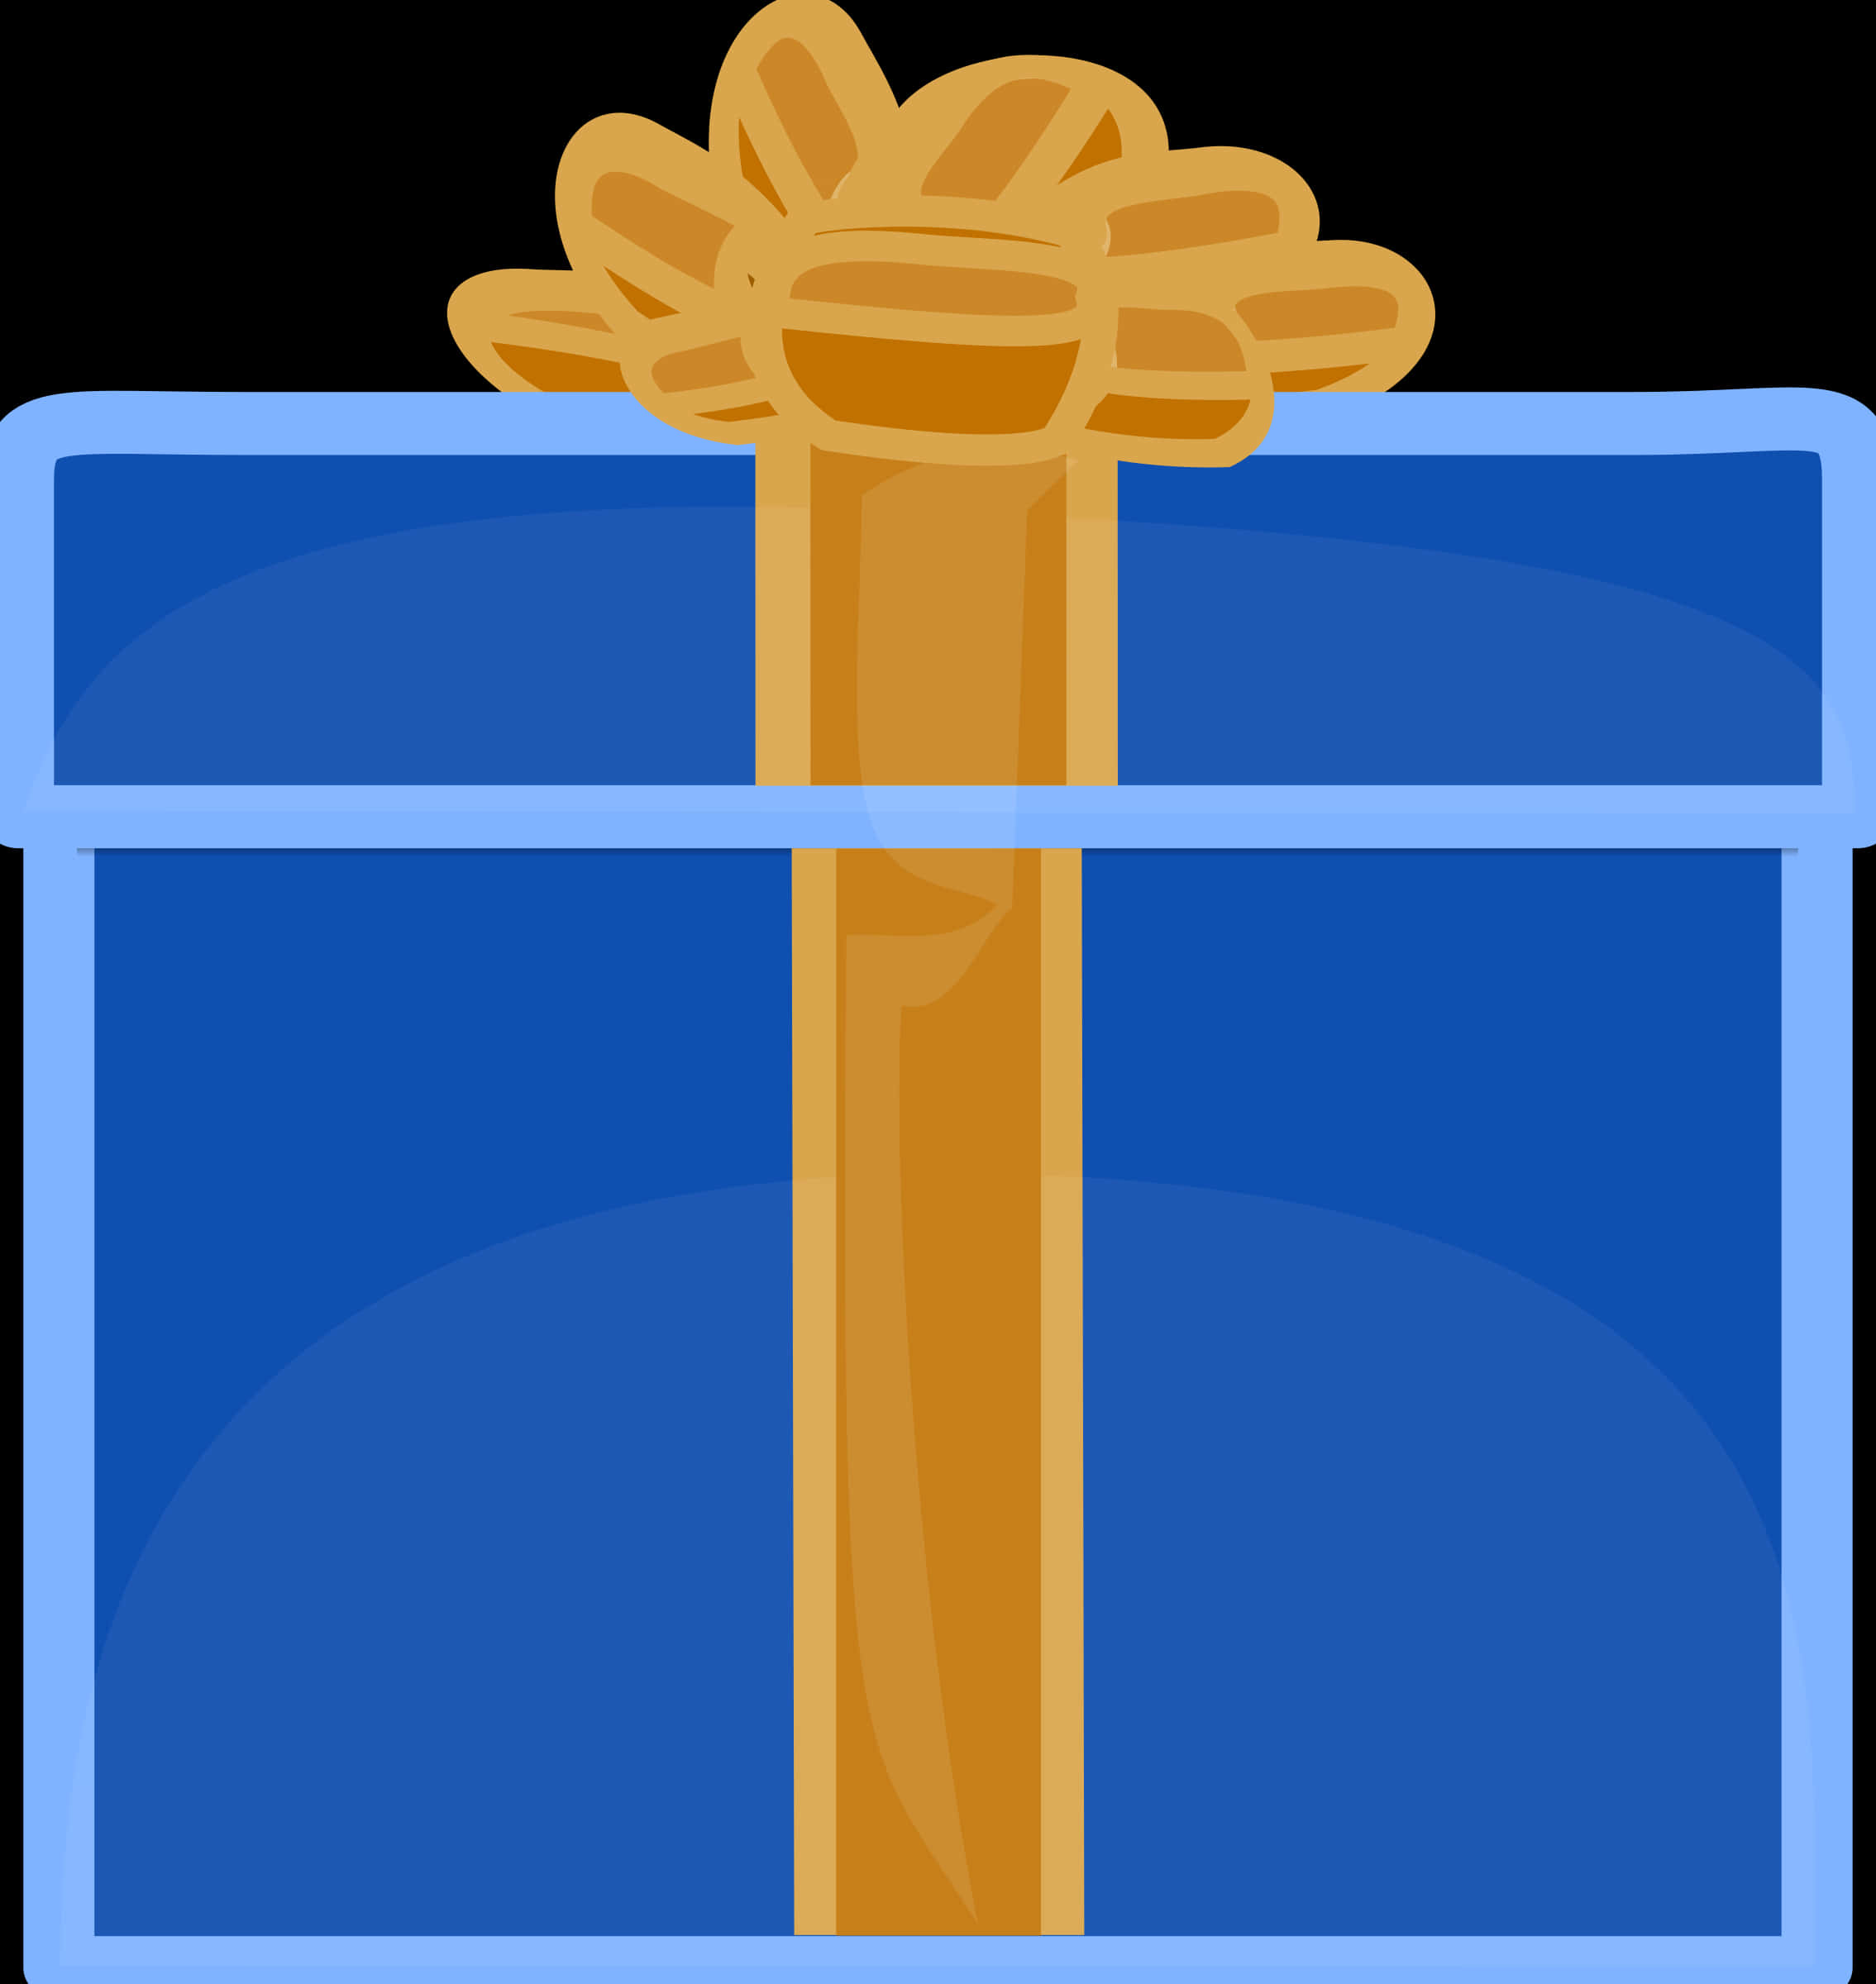 A Blue Box With A Gold Ribbon